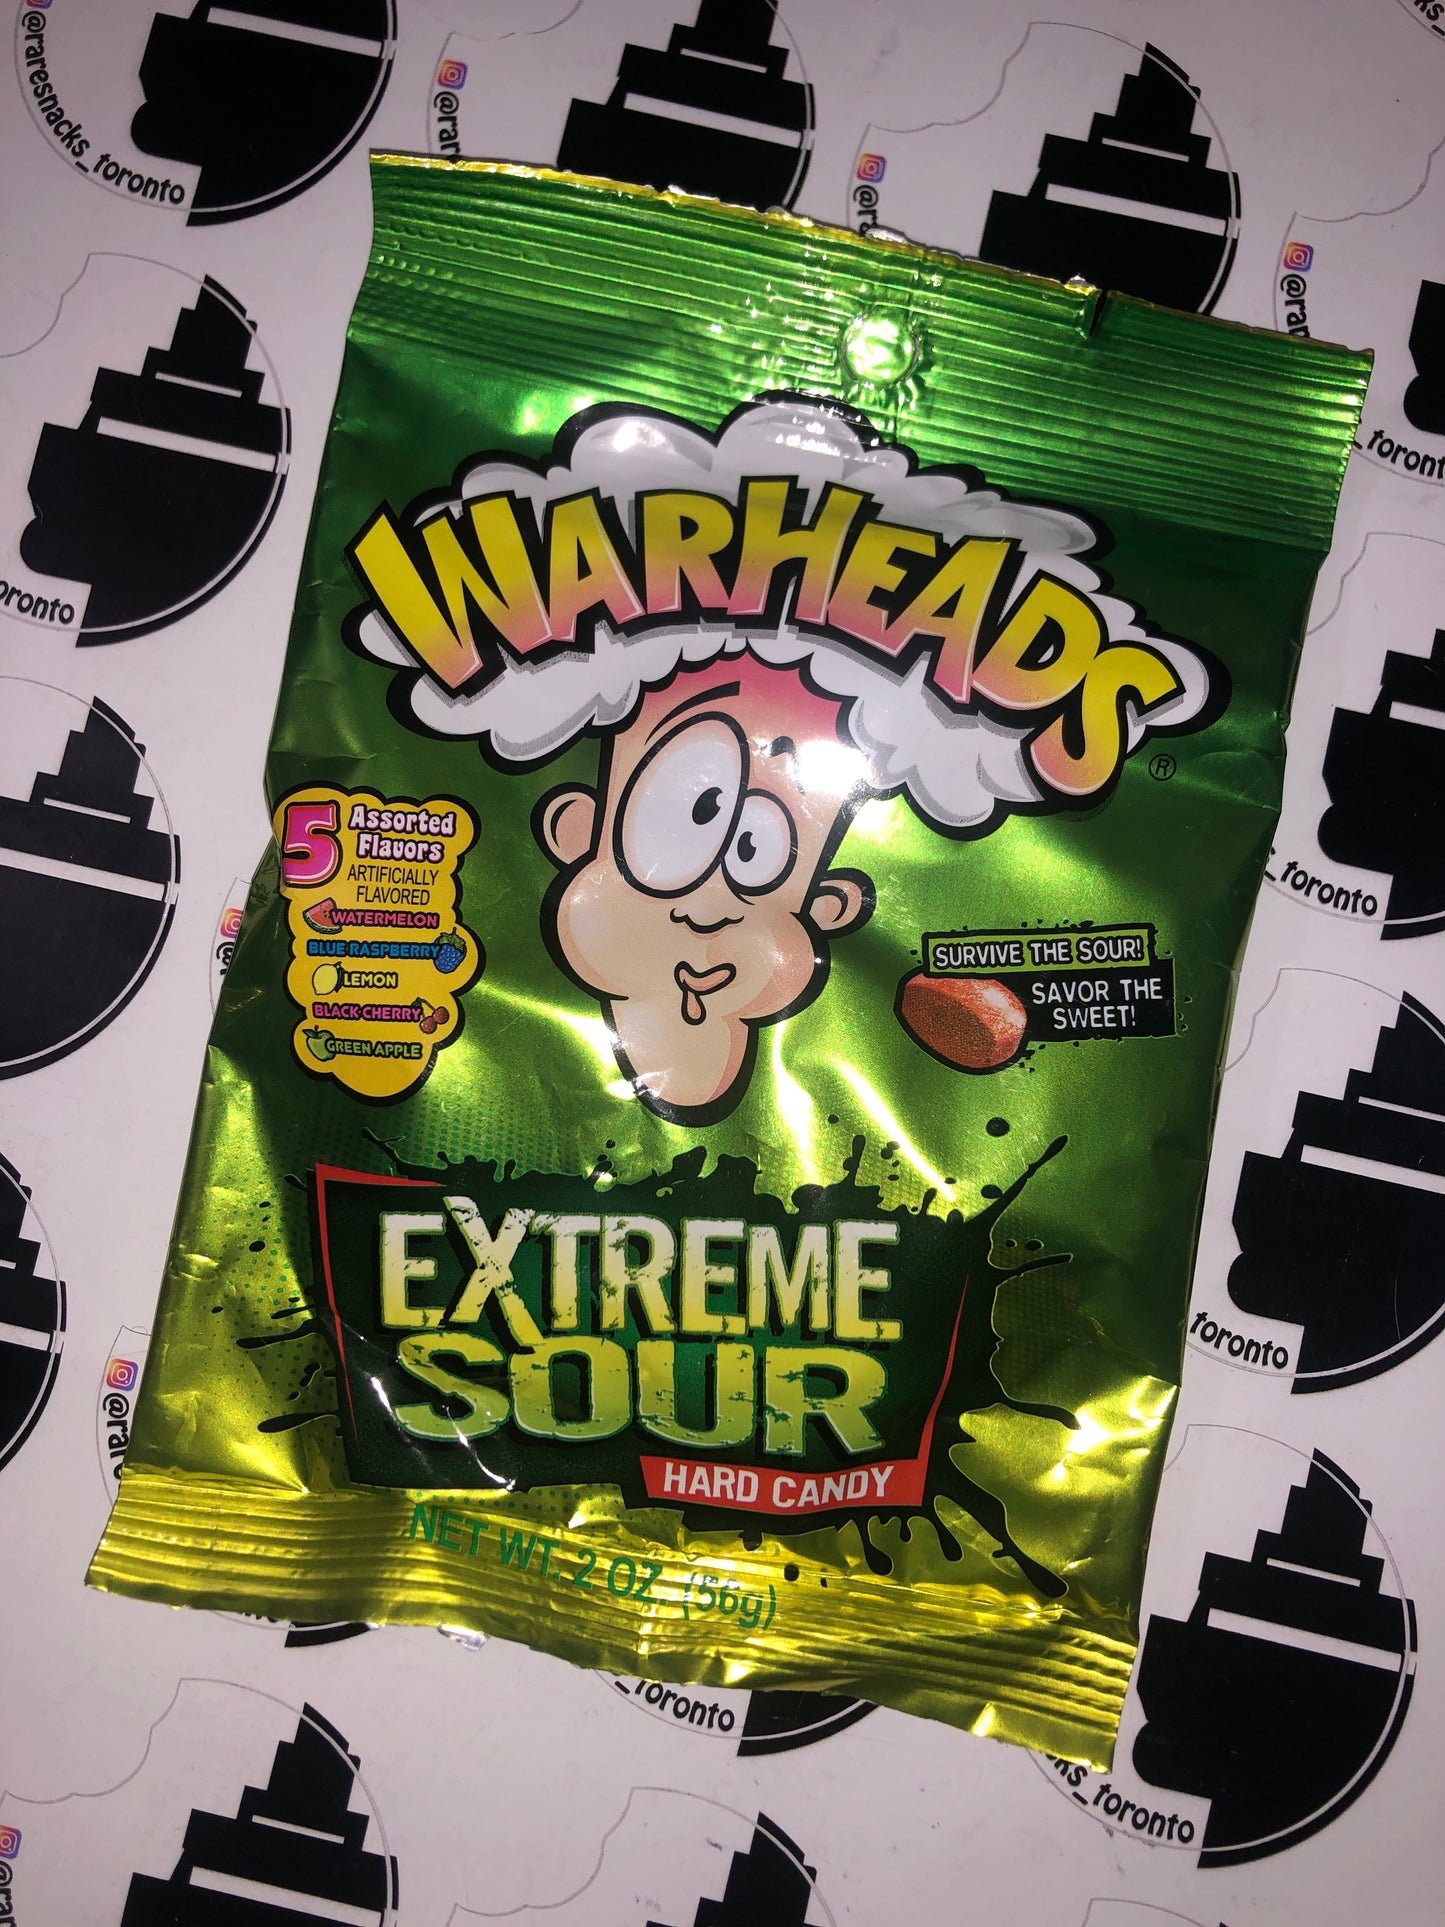 Warheads extreme sour hard candy 2oz